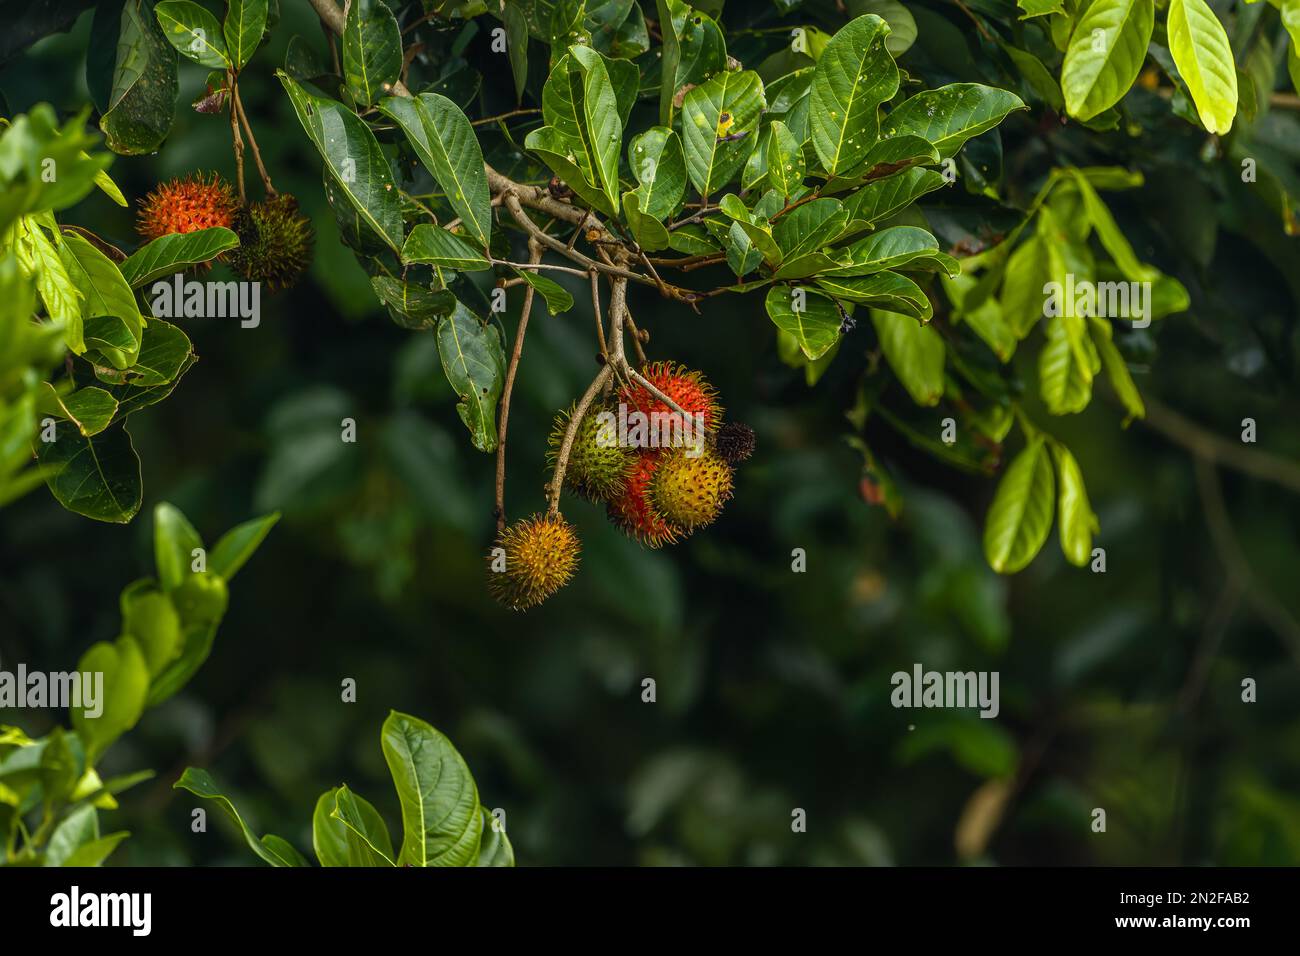 The rambutan tree has broad green leaves and is bearing red fruit, with a blurry background of green leaves Stock Photo